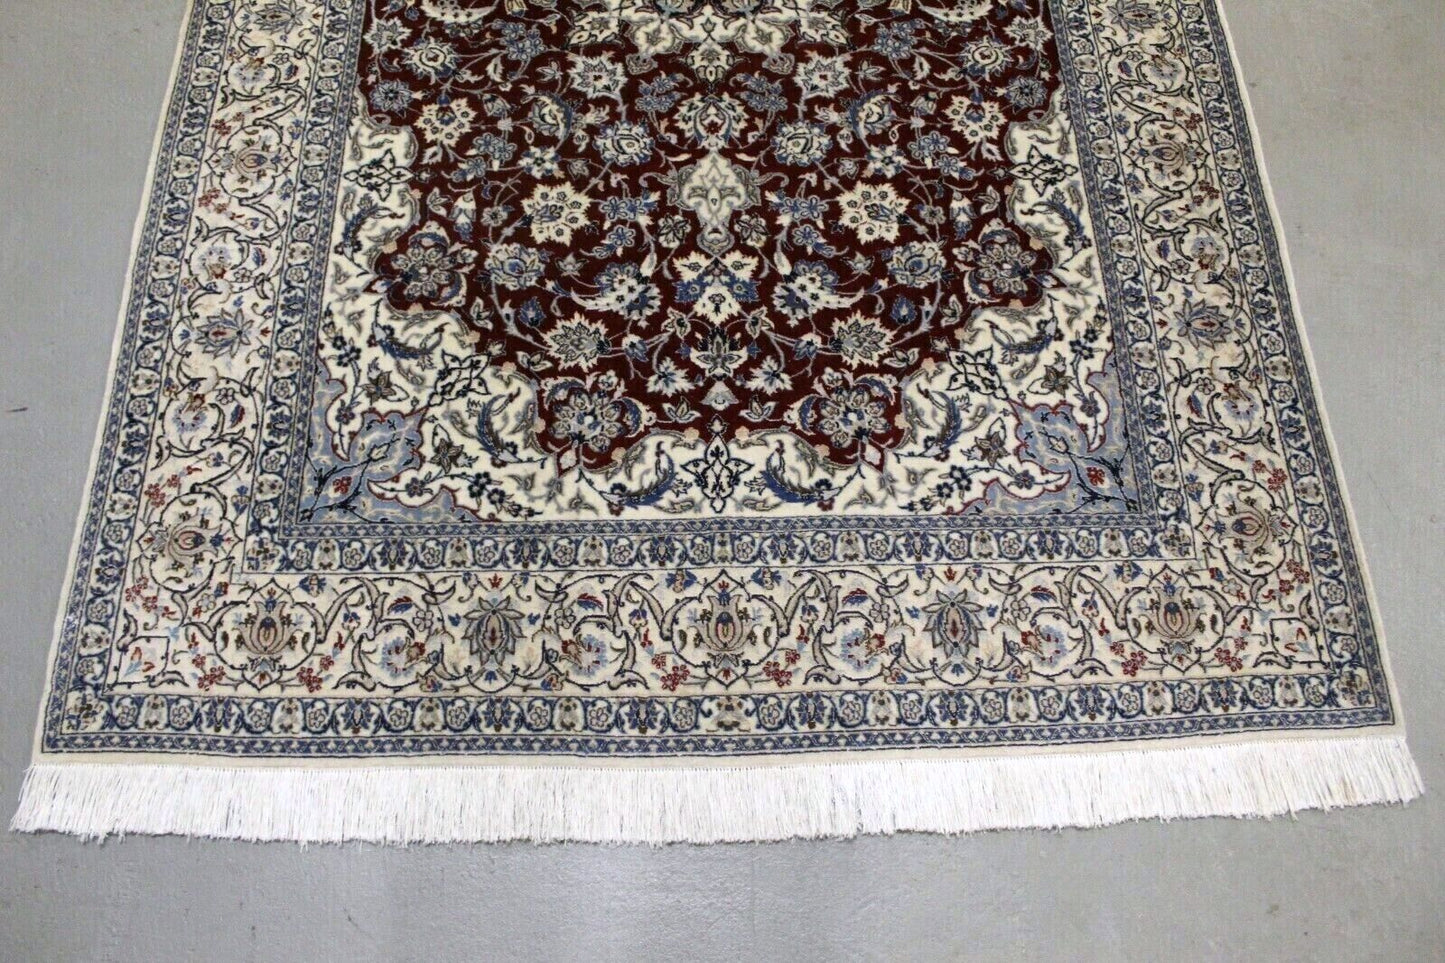 Hints of Blue, Beige, Maroon, Brown, and Light Blue Intertwined in Nain Rug Design - 1970s